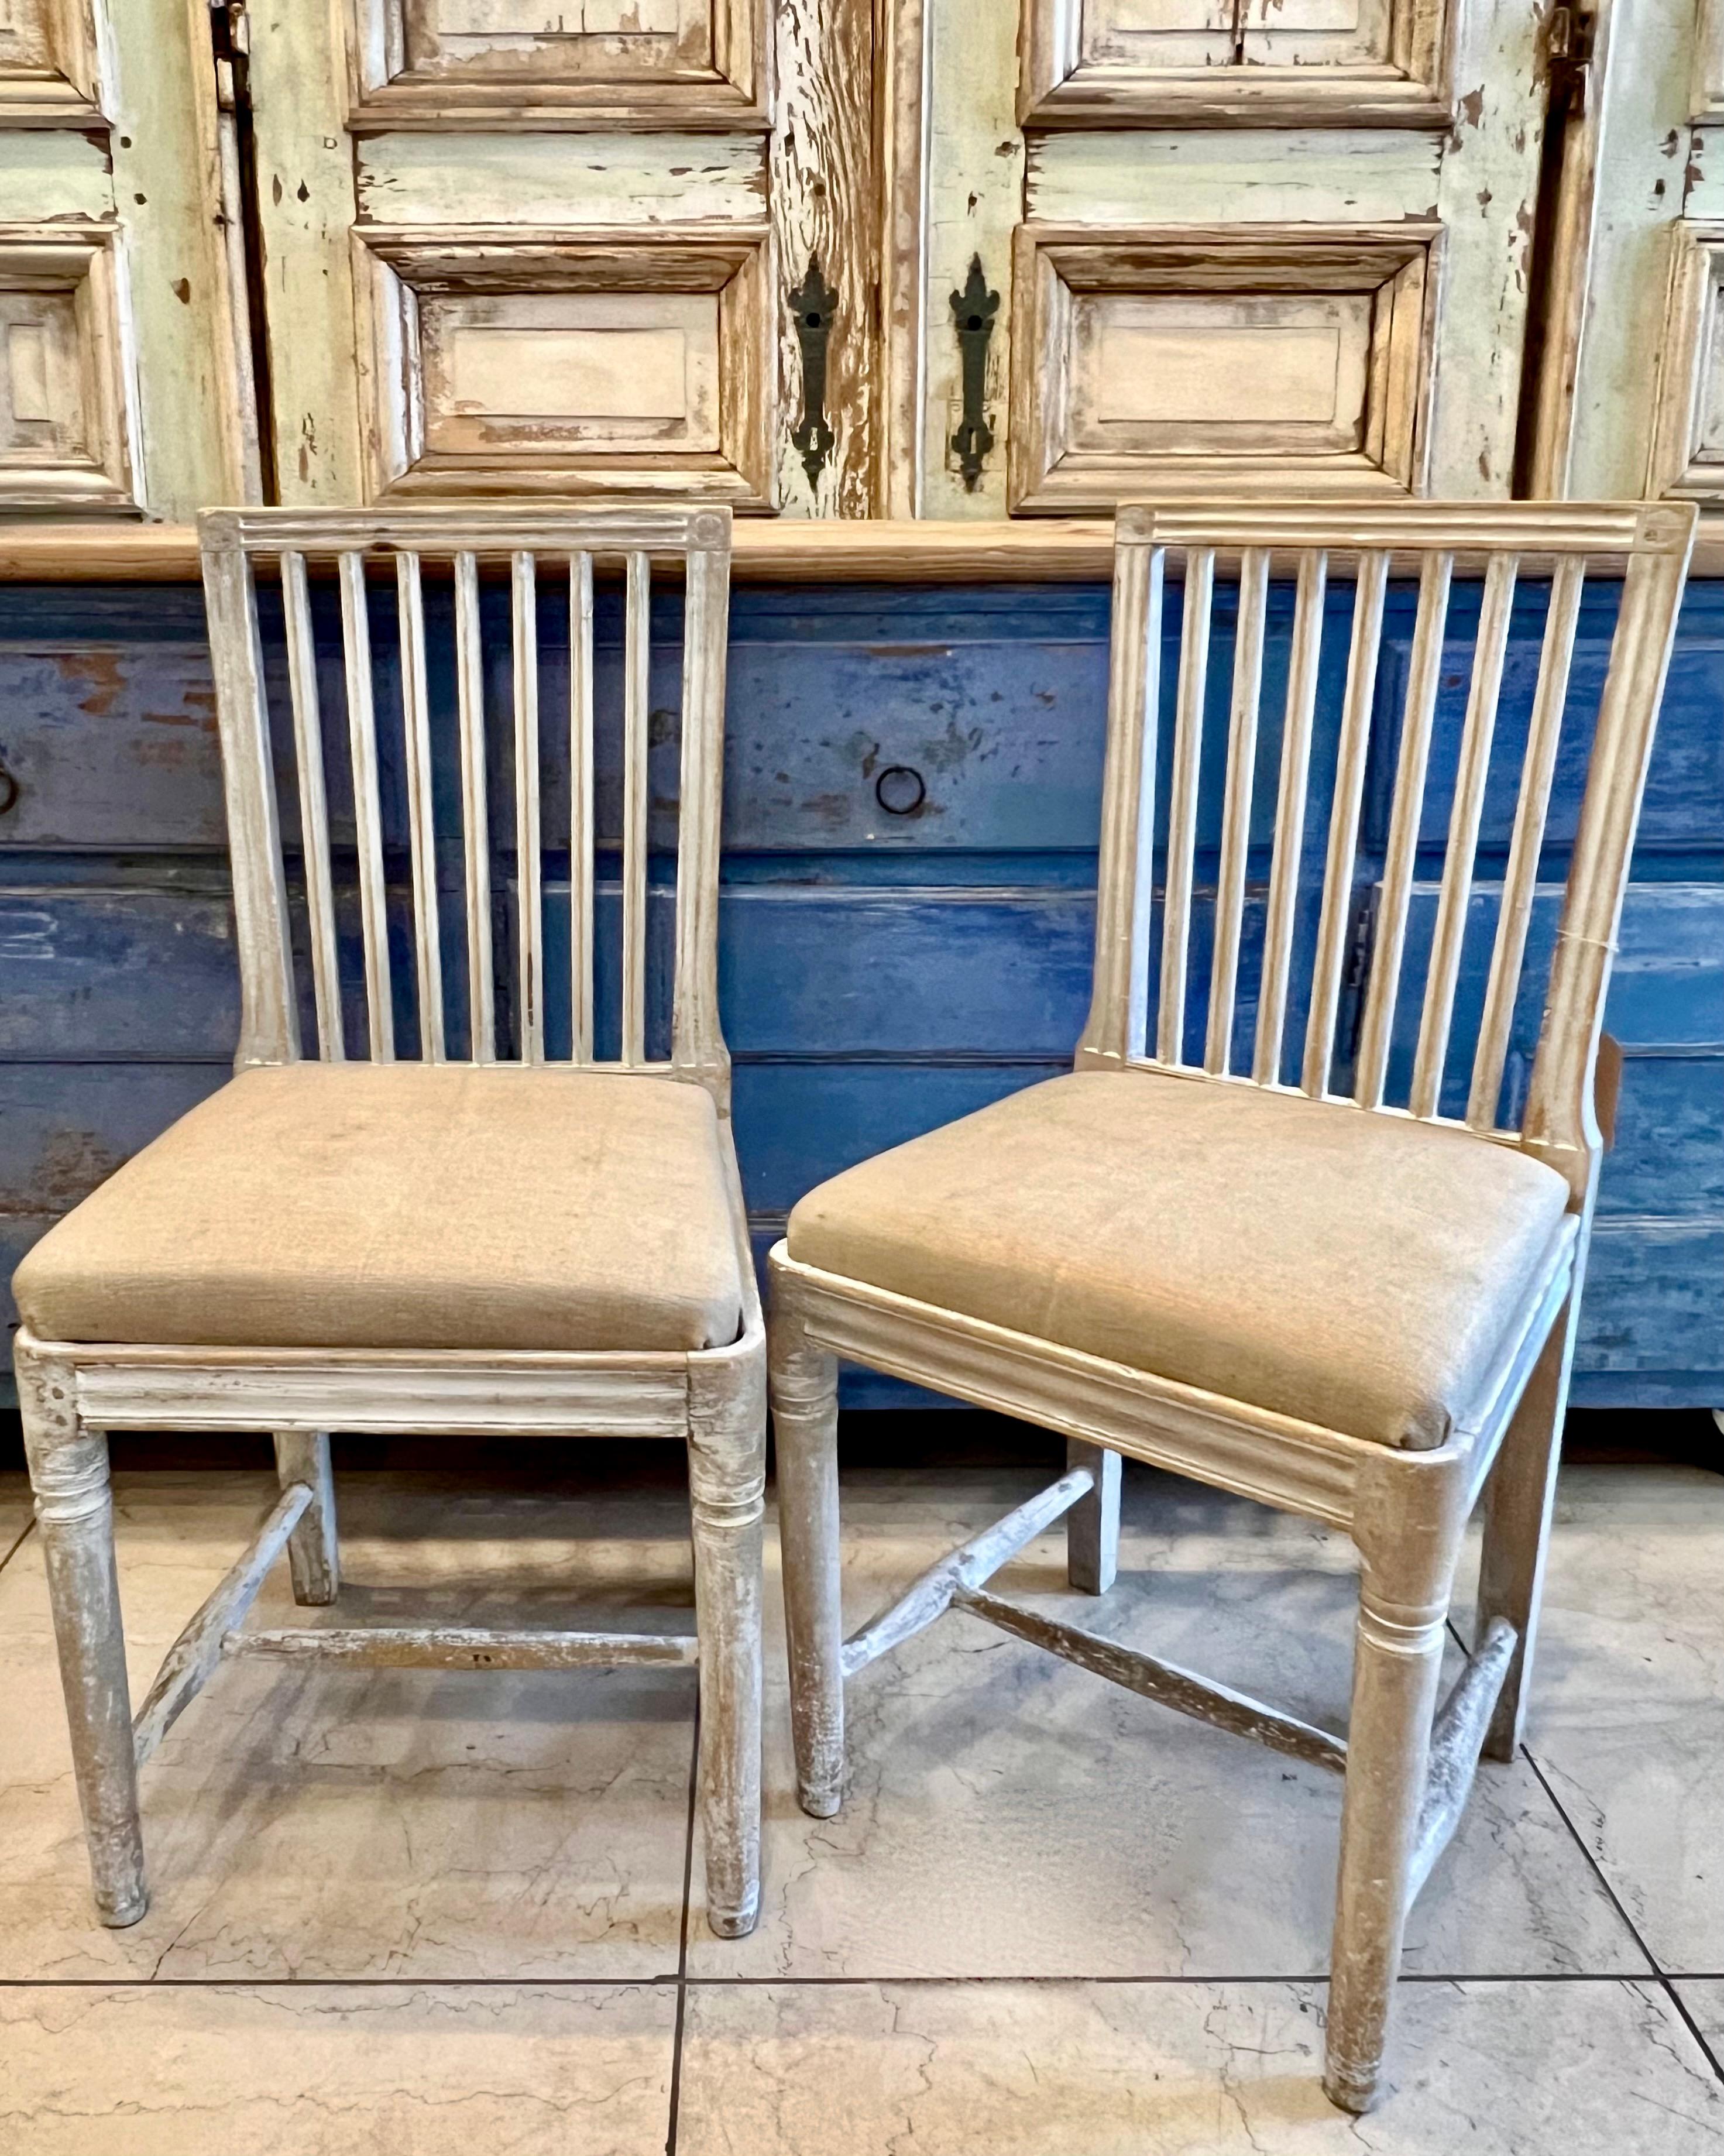 Pair of early 19th century Swedish chairs with reeded chair back supports, reeded front rail and tapered turned legs.
The seat pads covered in linen.